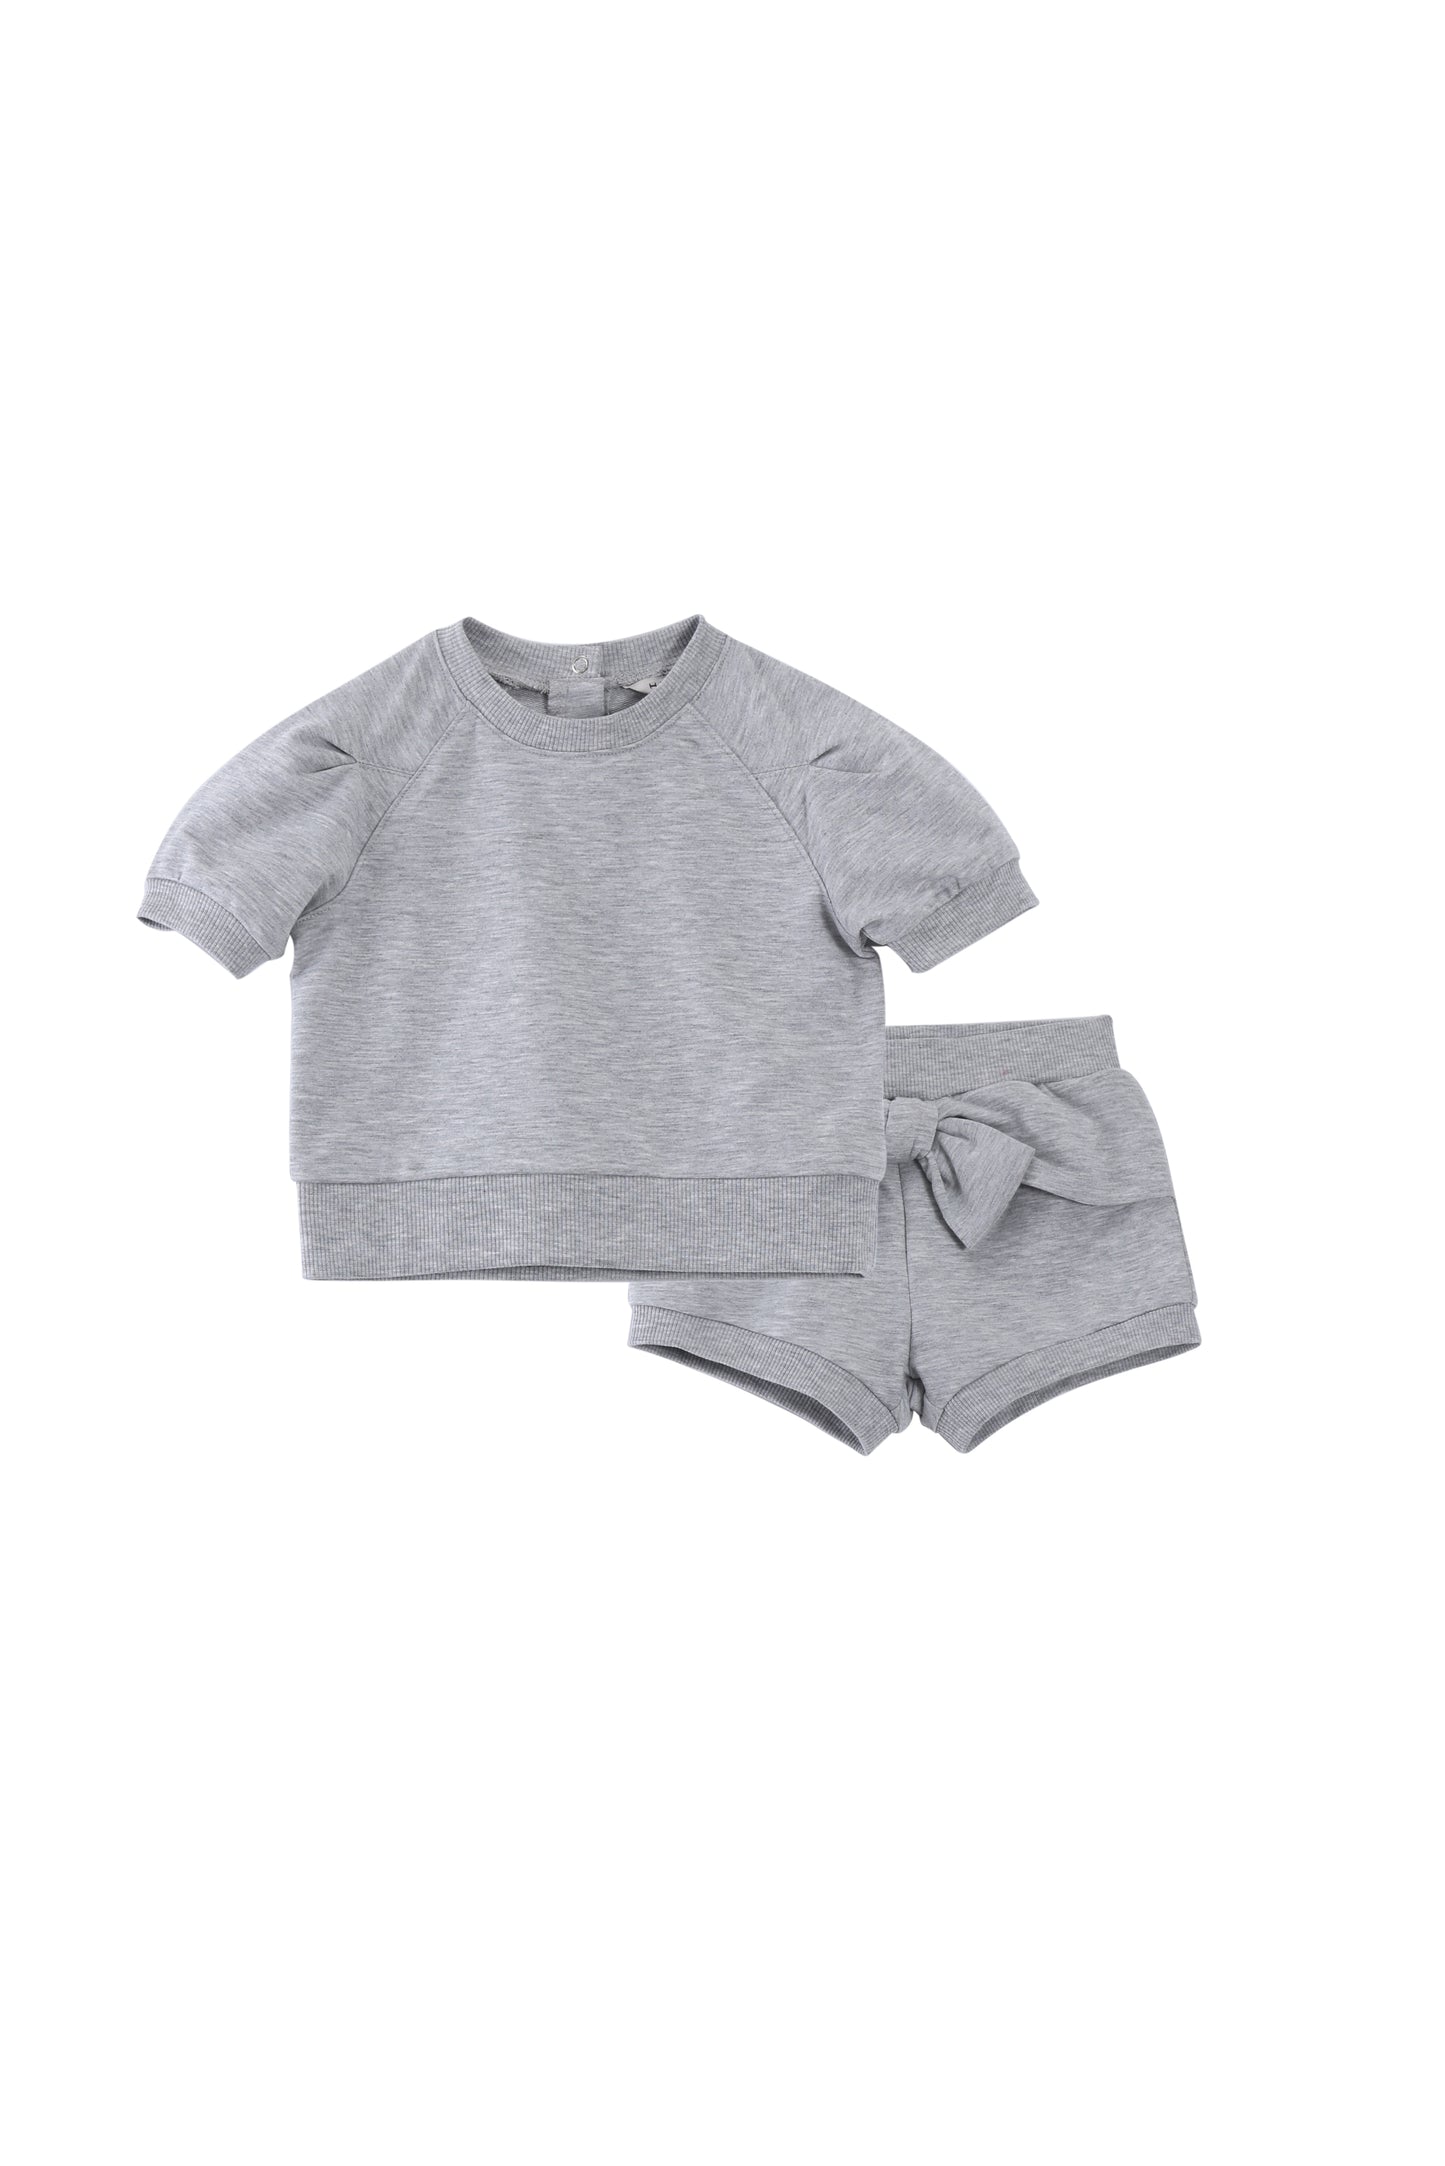 LIGHT GREY FRENCH TERRY SWEATSHIRT TOP AND SWEAT SHORTS WITH A BOW